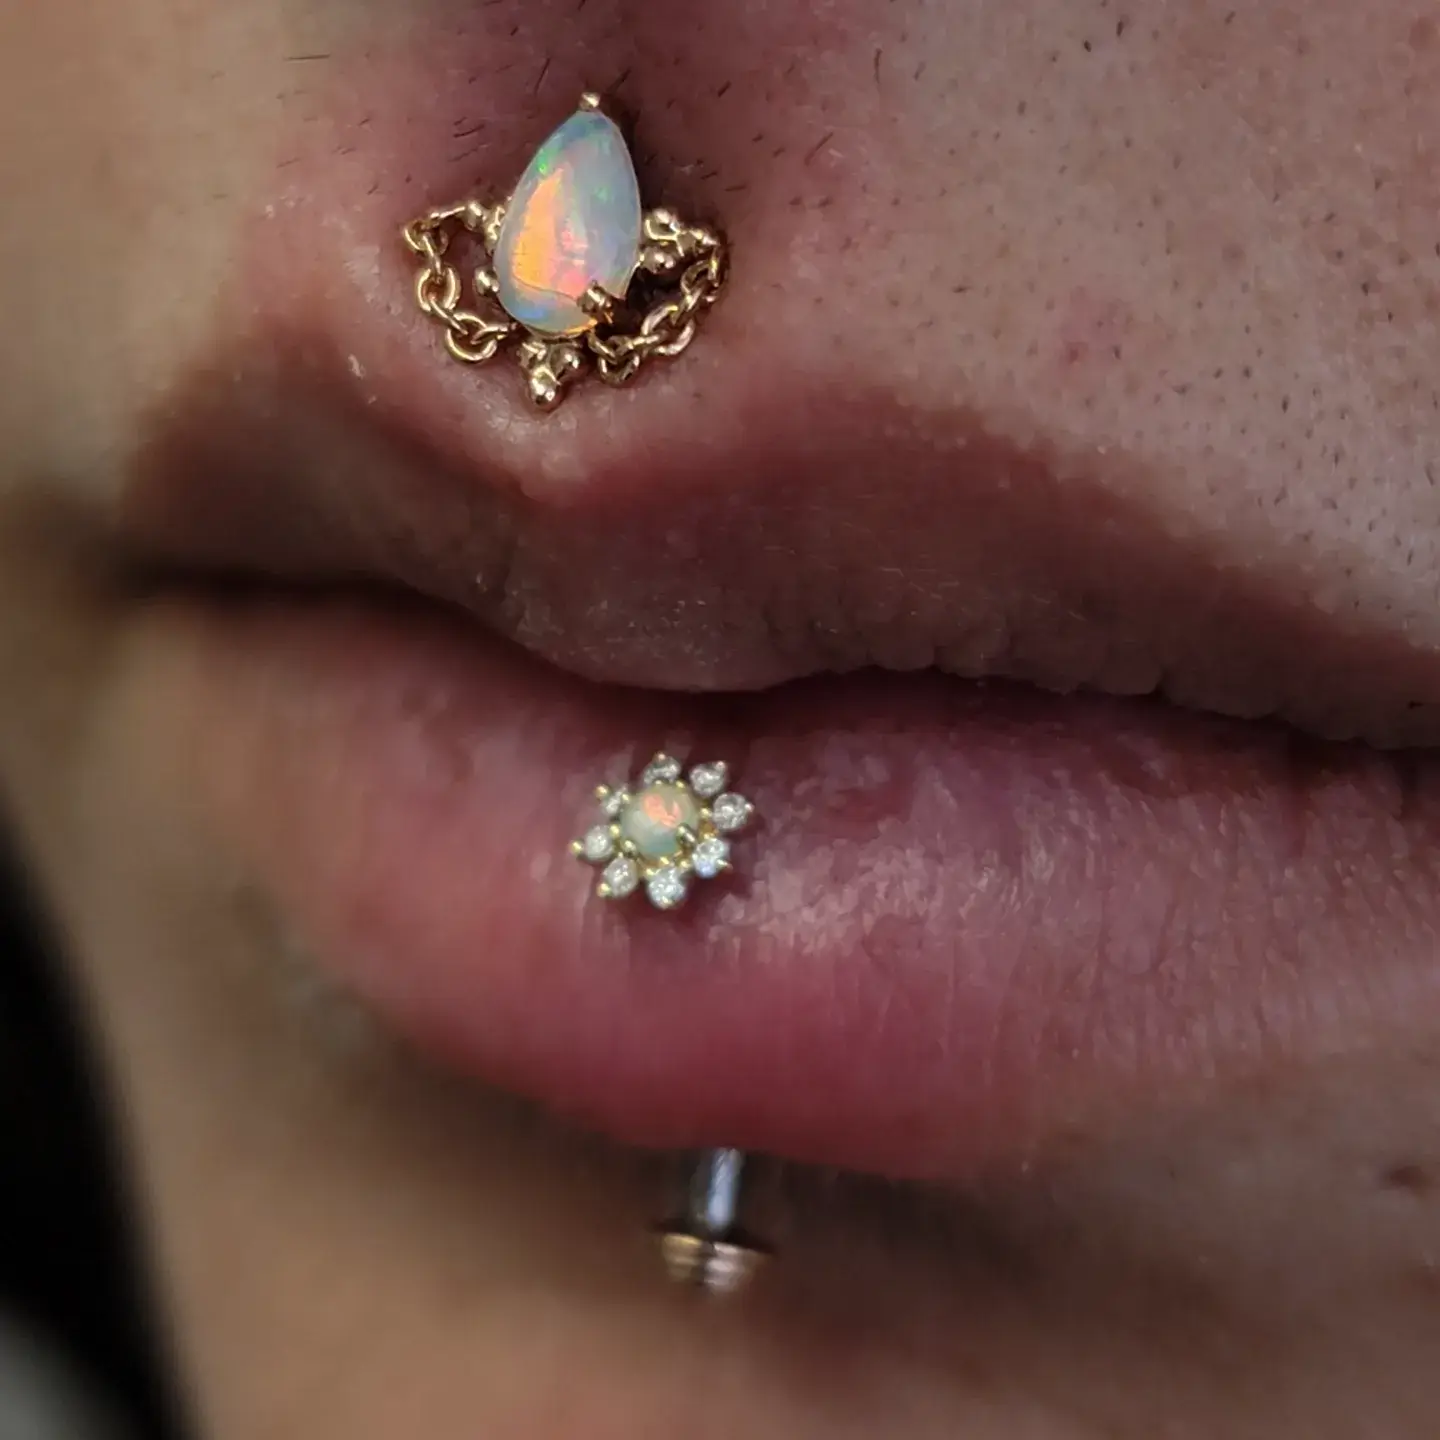 Piercings not done here, jewelry upgraded to a mix of yellow and rose gold with genuine diamonds and opal